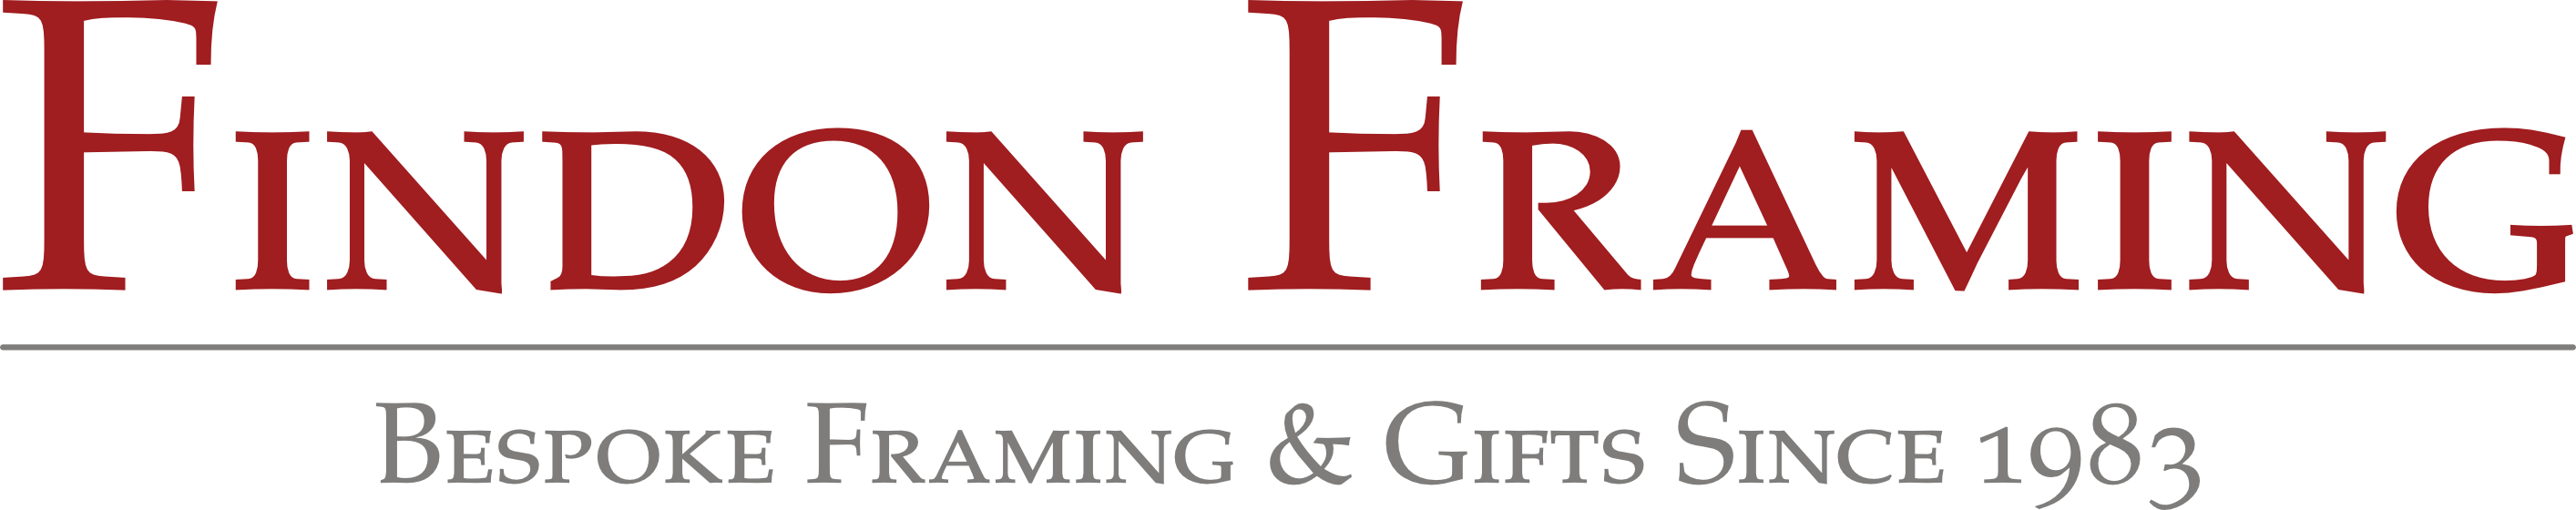 Welcome to Findon Framing